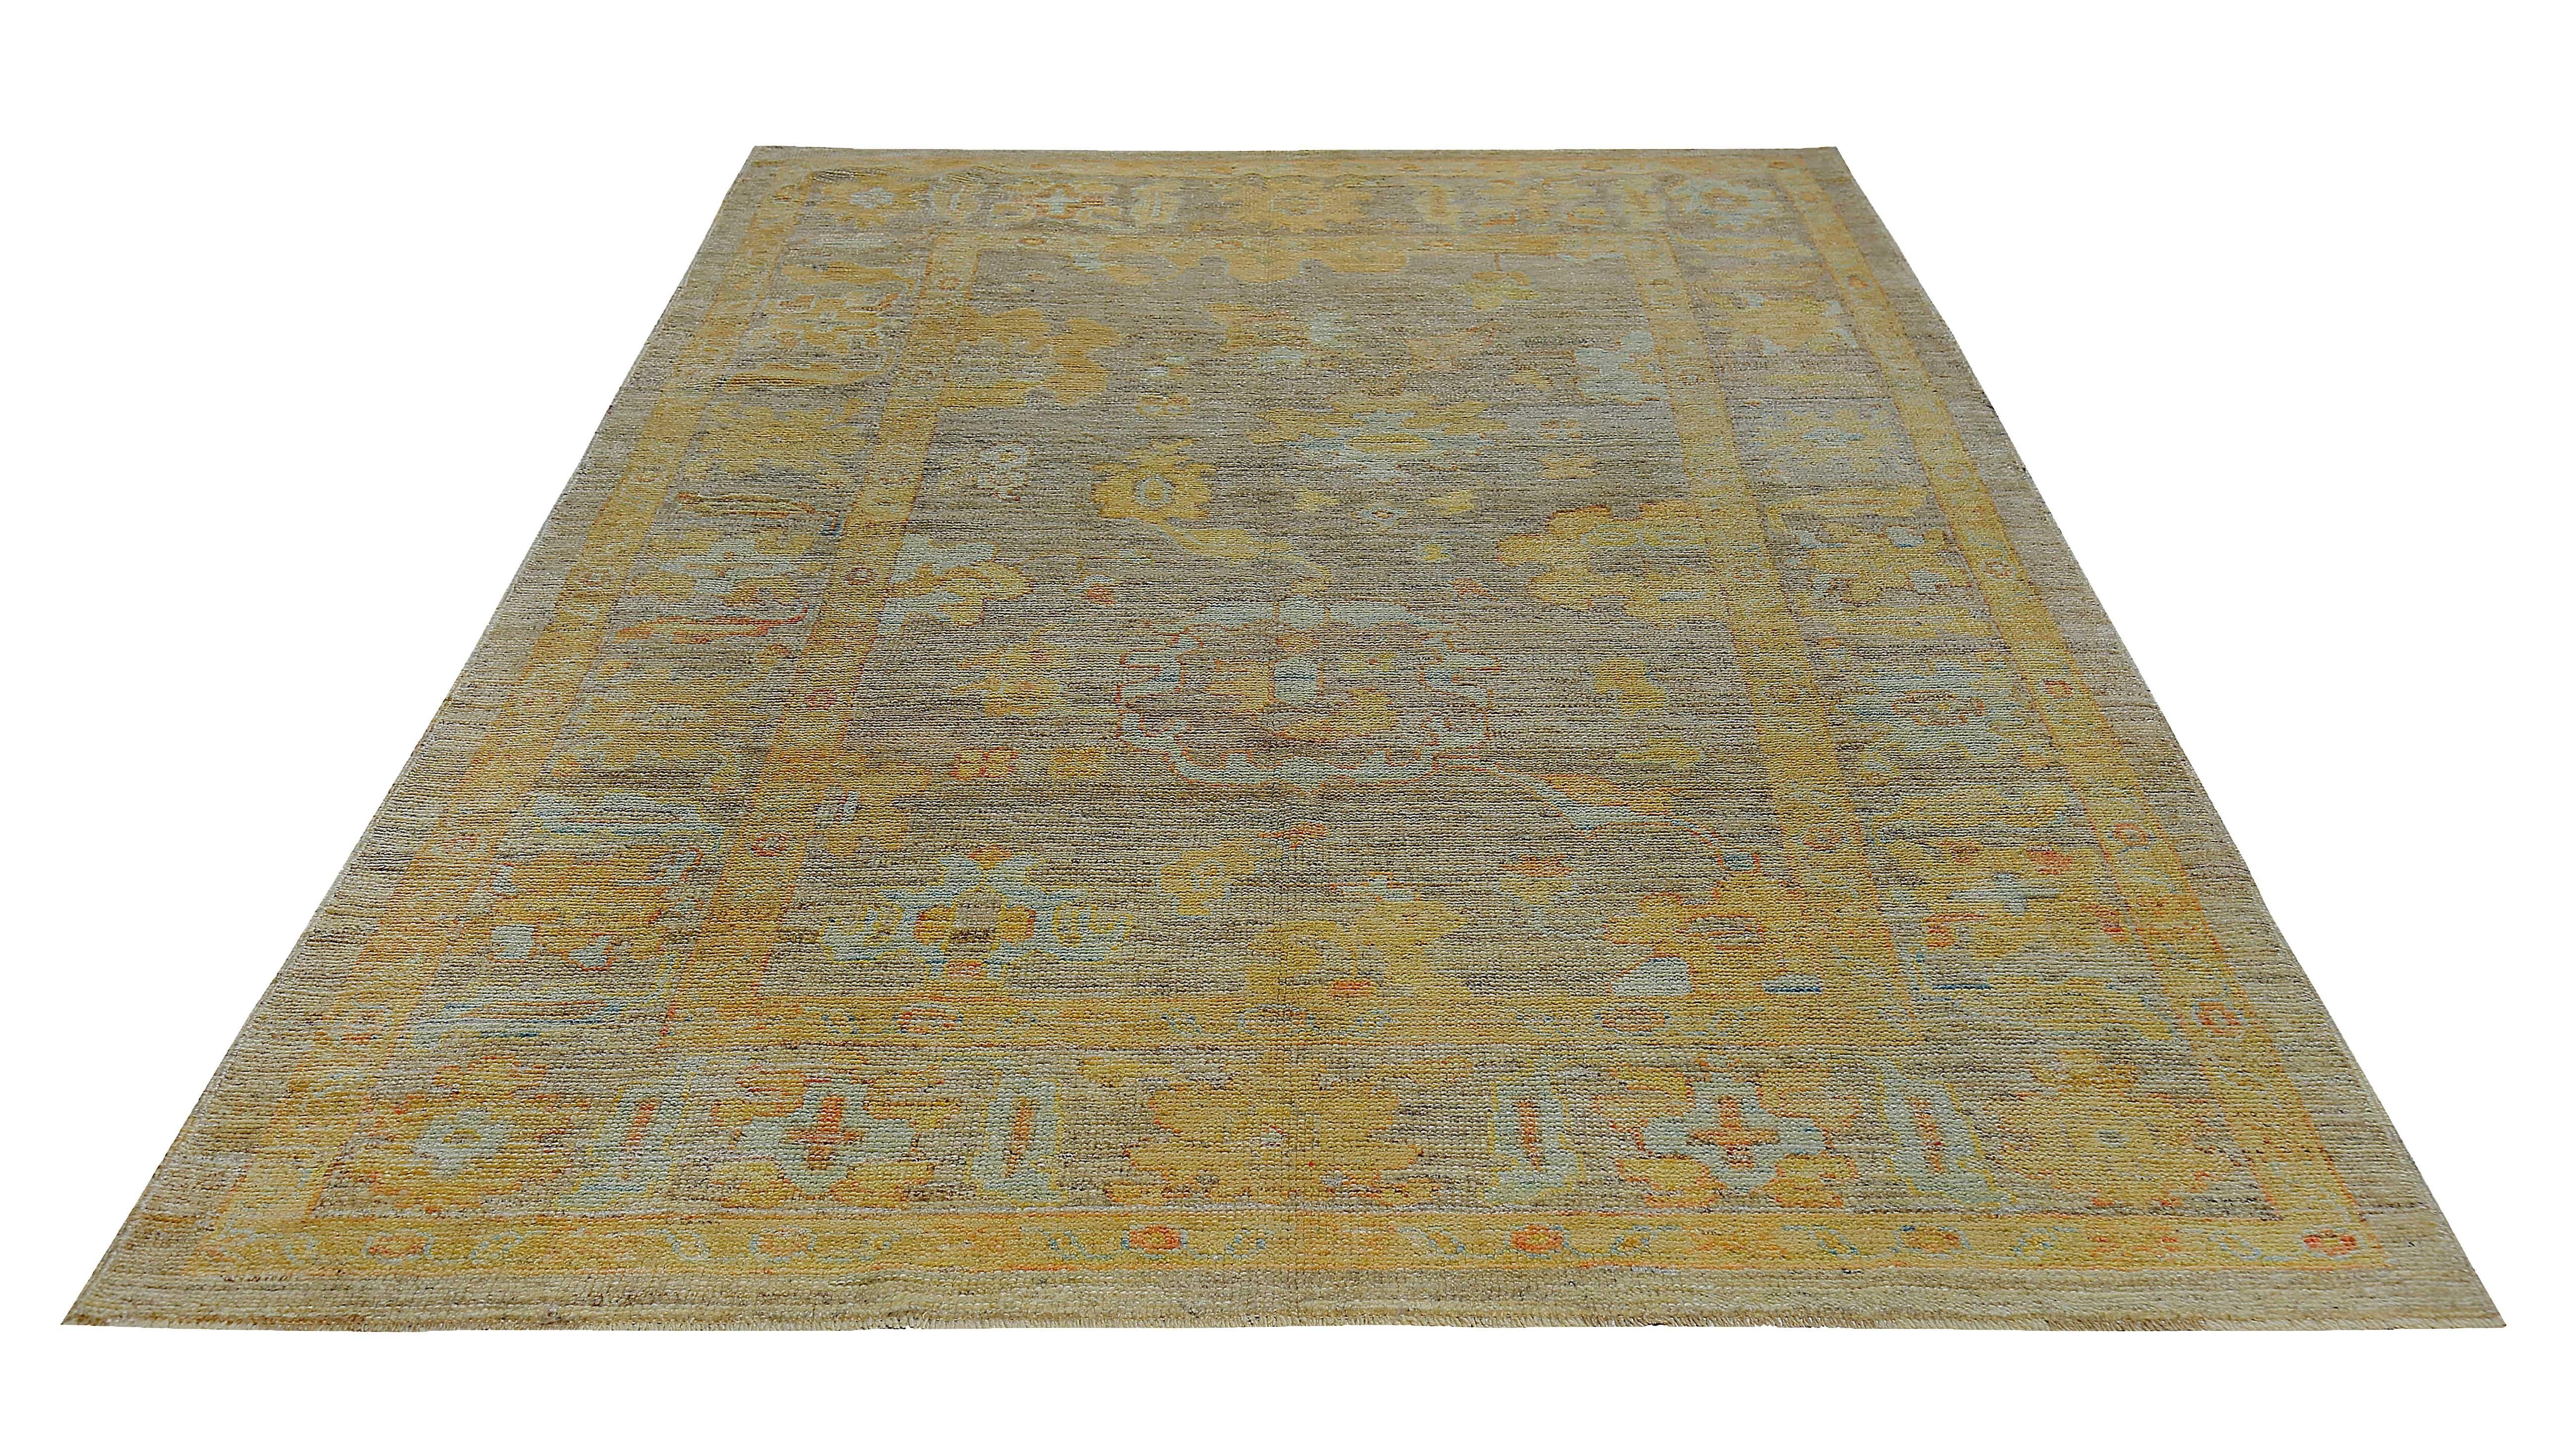 New Turkish rug made of handwoven sheep’s wool of the finest quality. It’s colored with organic vegetable dyes that are certified safe for humans and pets alike. It features blue and gold floral patterns on a fine ivory and brown field. Flower